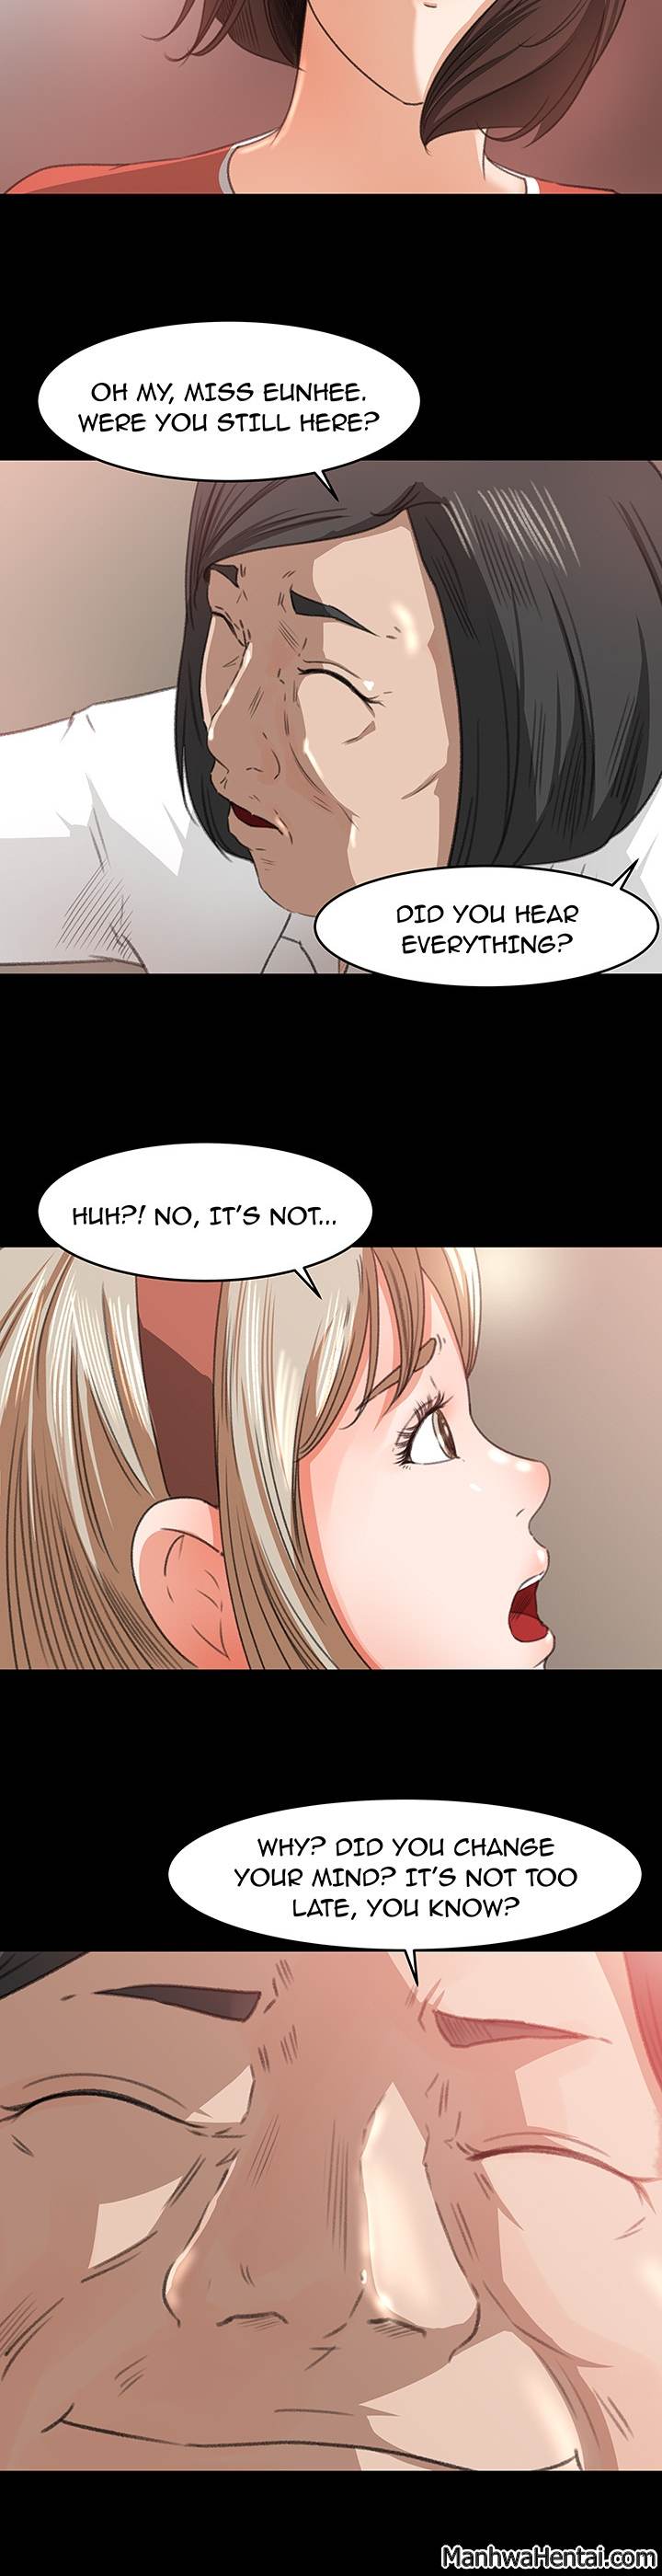 Inside the Uniform - Chapter 10 Page 19